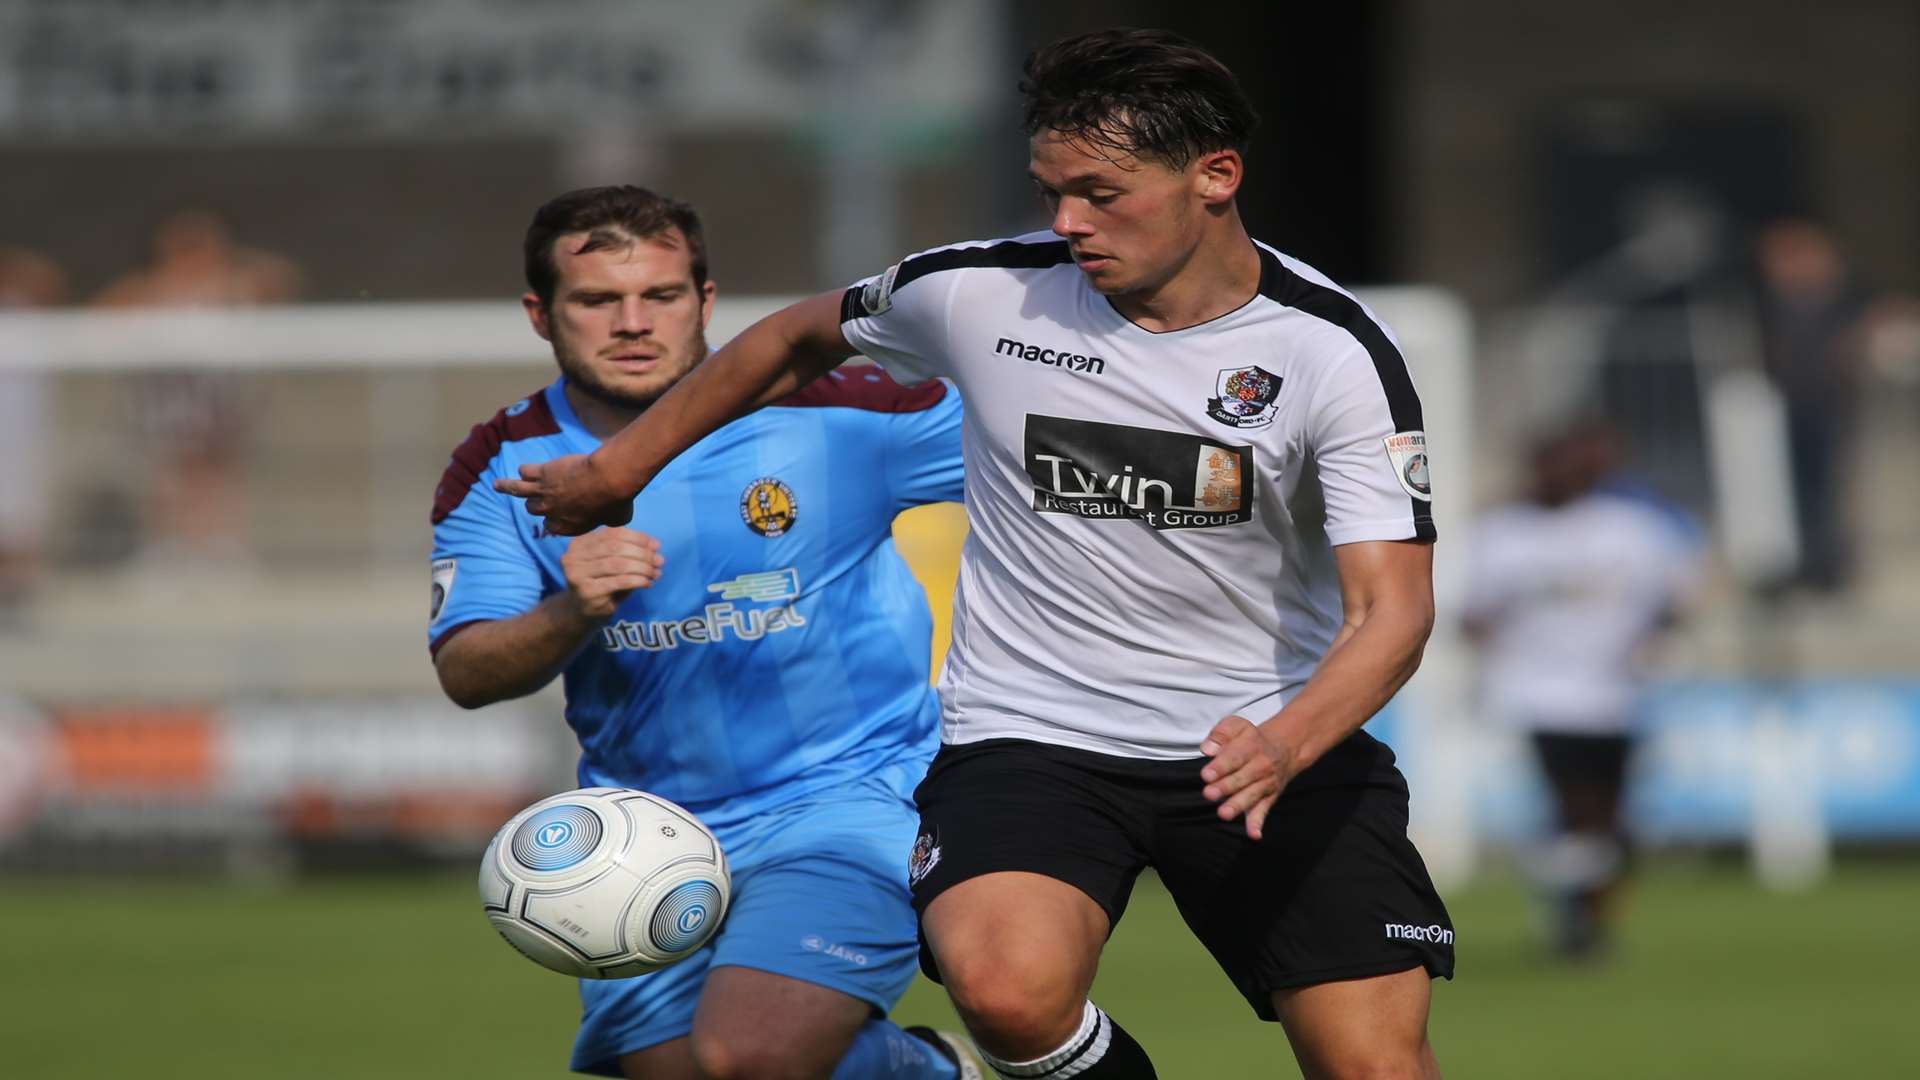 Alfie Pavey scored one of Dartford's four goals at Whitehawk on Tuesday Picture: John Westhrop